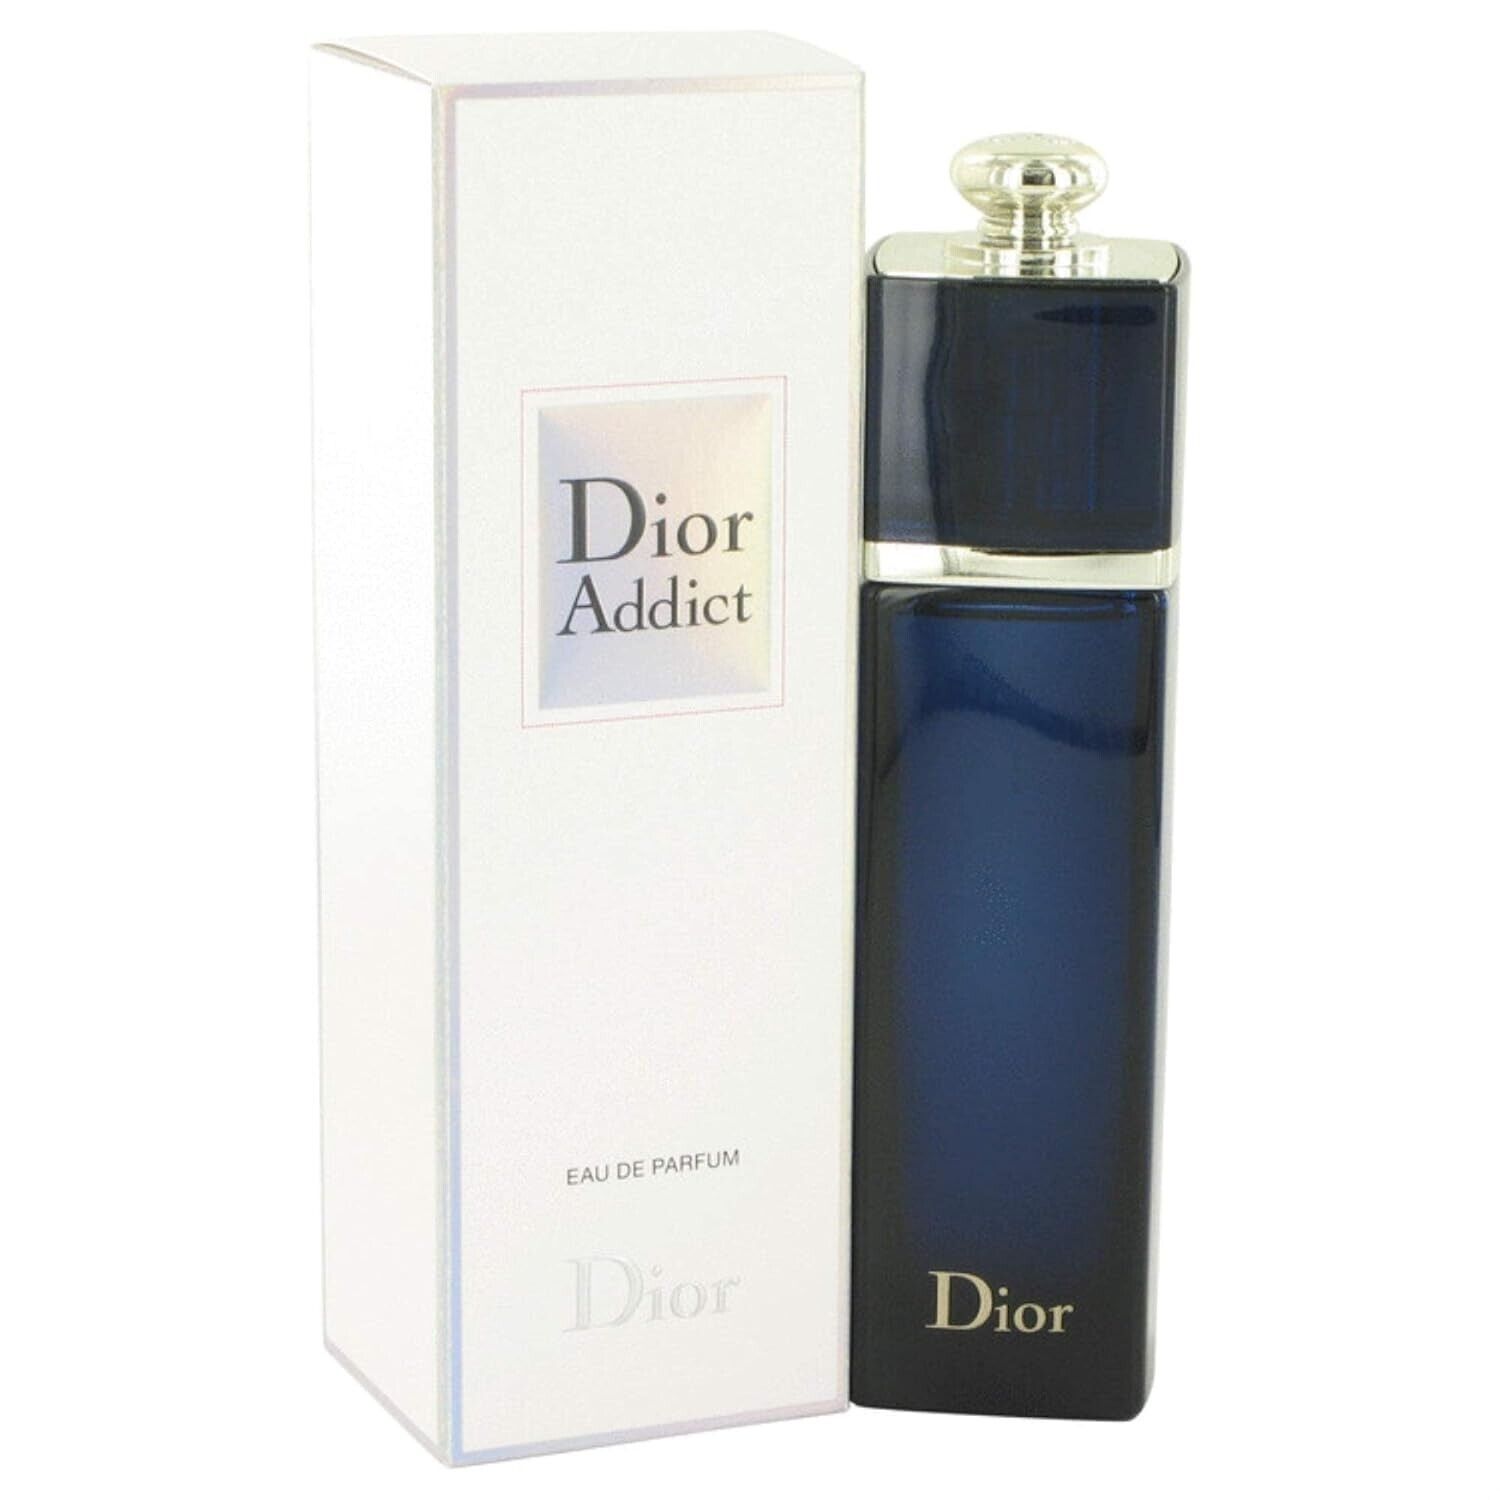 NewDior. Addict by Christian Dior EDP for Women 3.4 oz 100 ml IN SEALED BOX